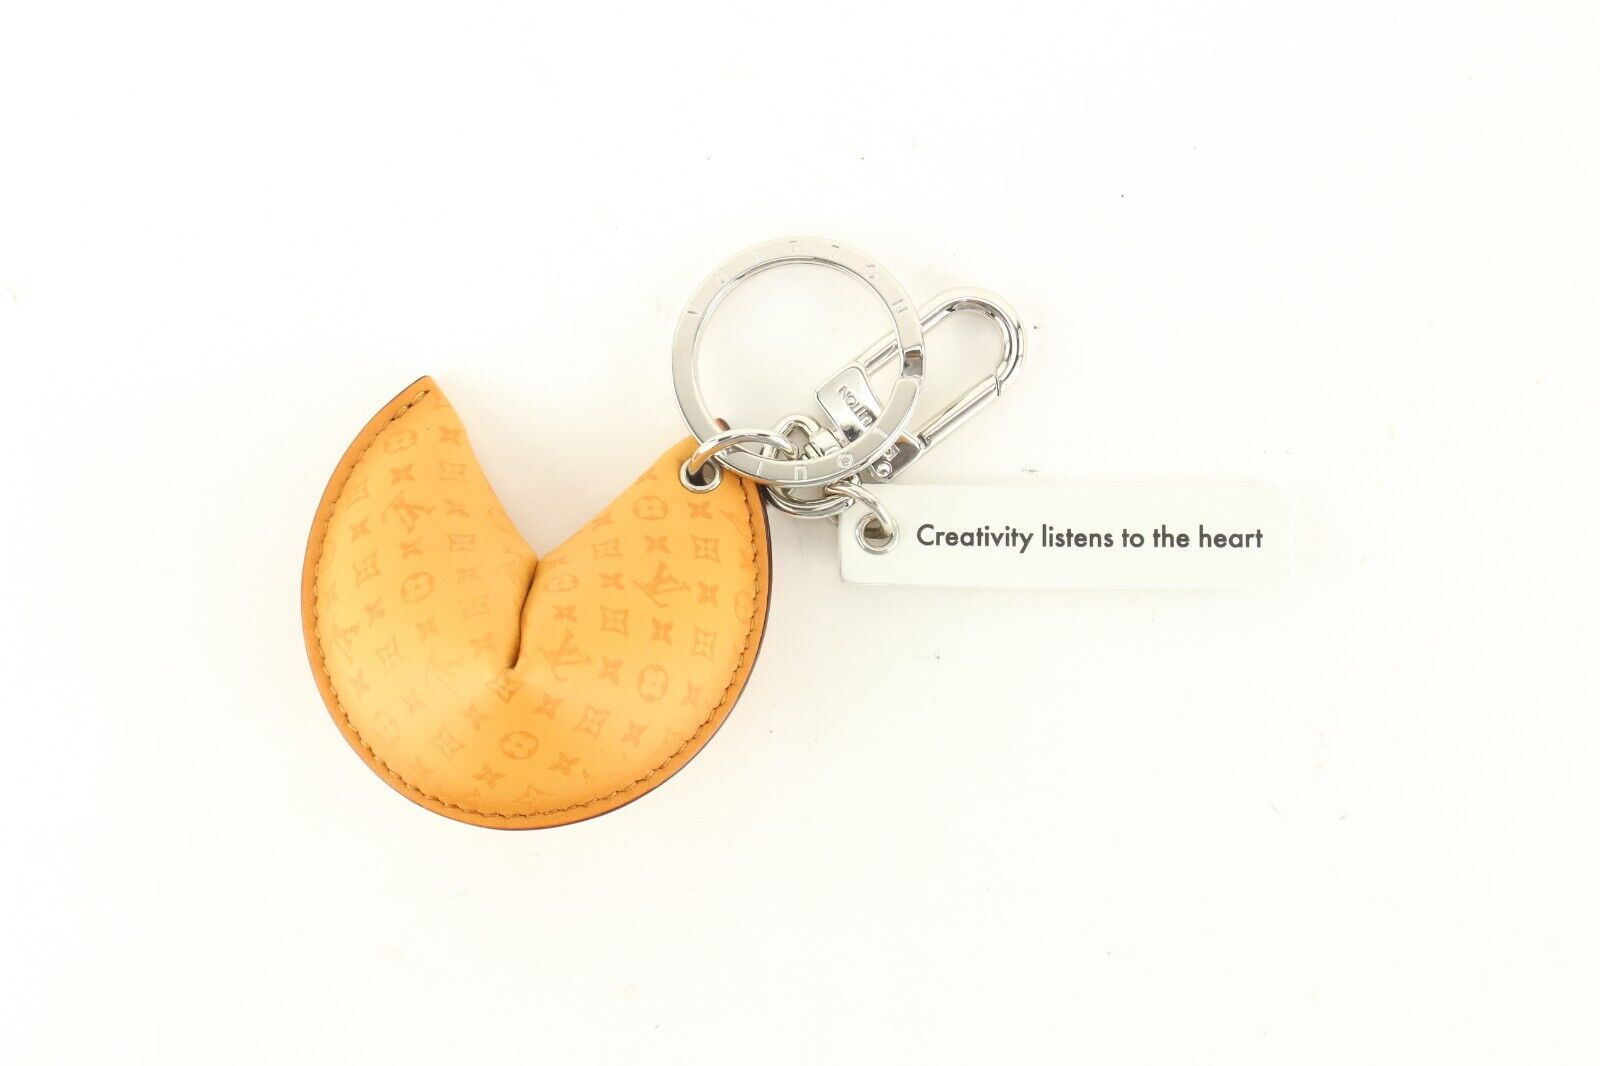 LOUIS VUITTON keychain LV FORTUNE COOKIE. Coll. 2023. …